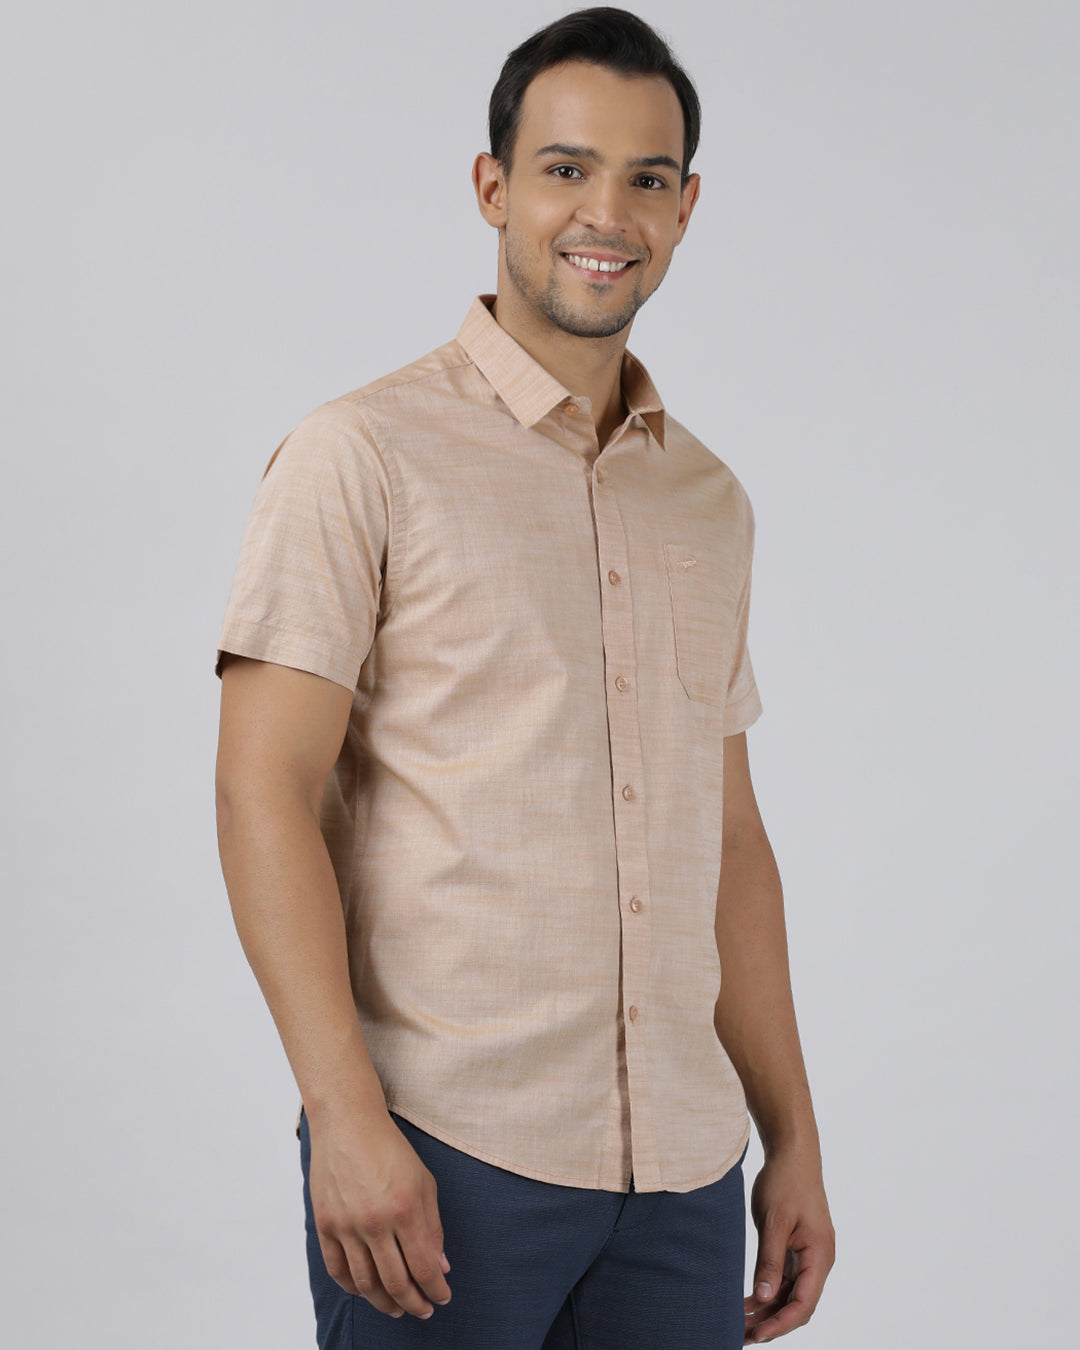 Casual Beige Half Sleeve Regular Fit Solid Shirt with Collar for Men